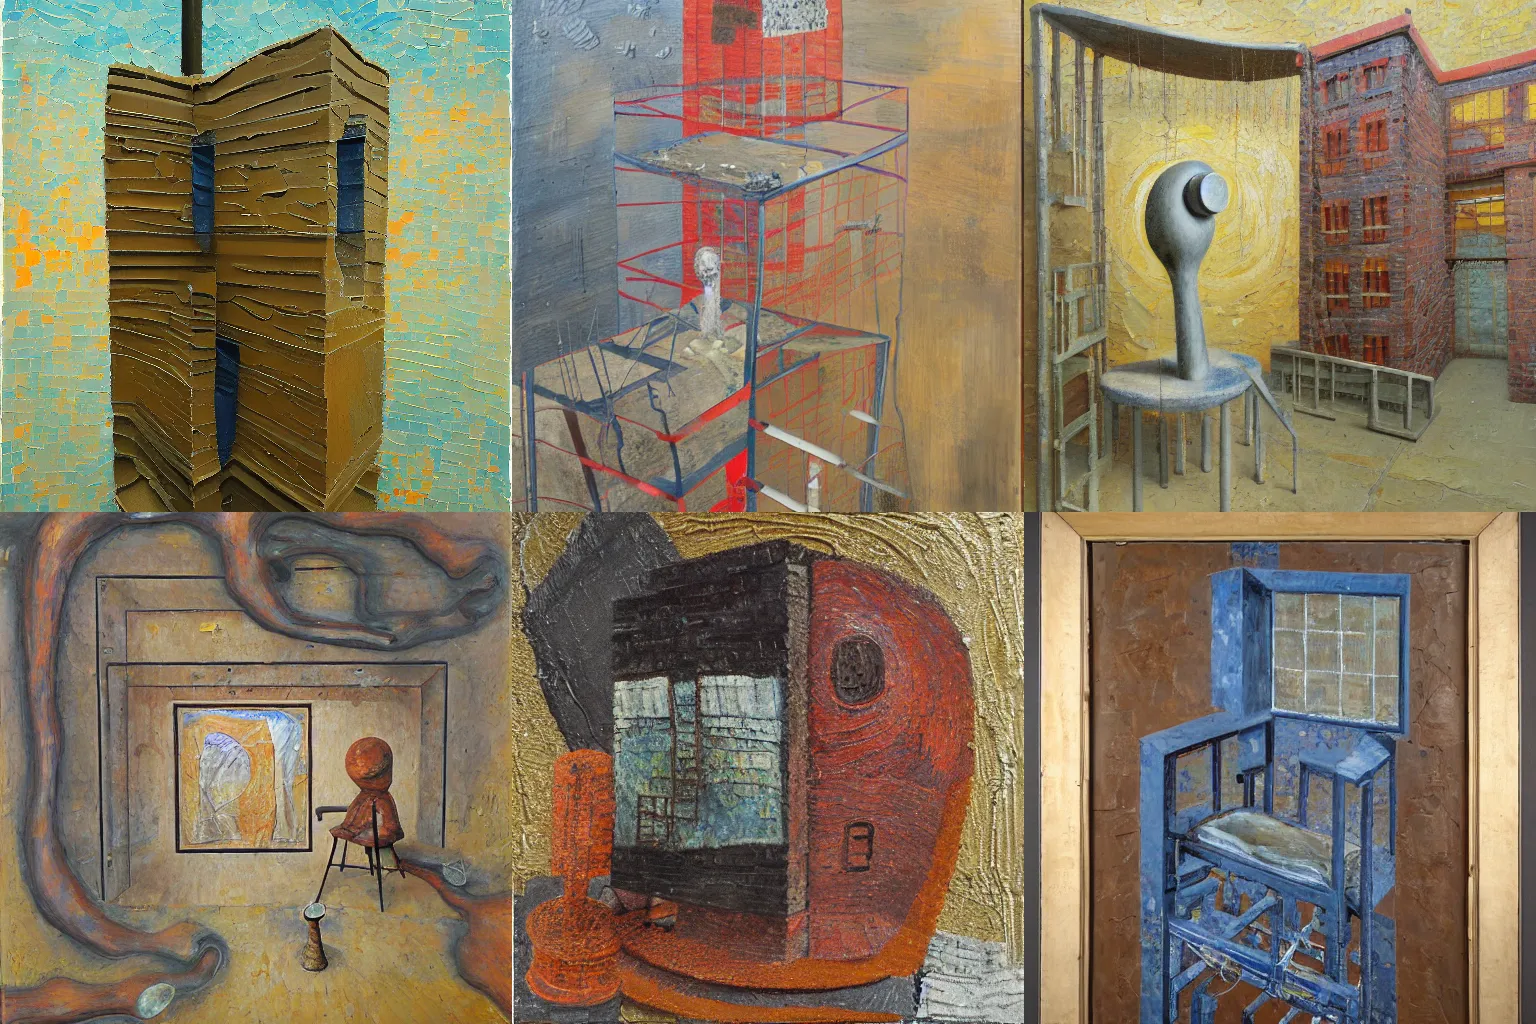 Prompt: a detailed, impasto painting by shaun tan and louise bourgeois of an abstract forgotten sculpture by ivan seal and the caretaker, hospital structure